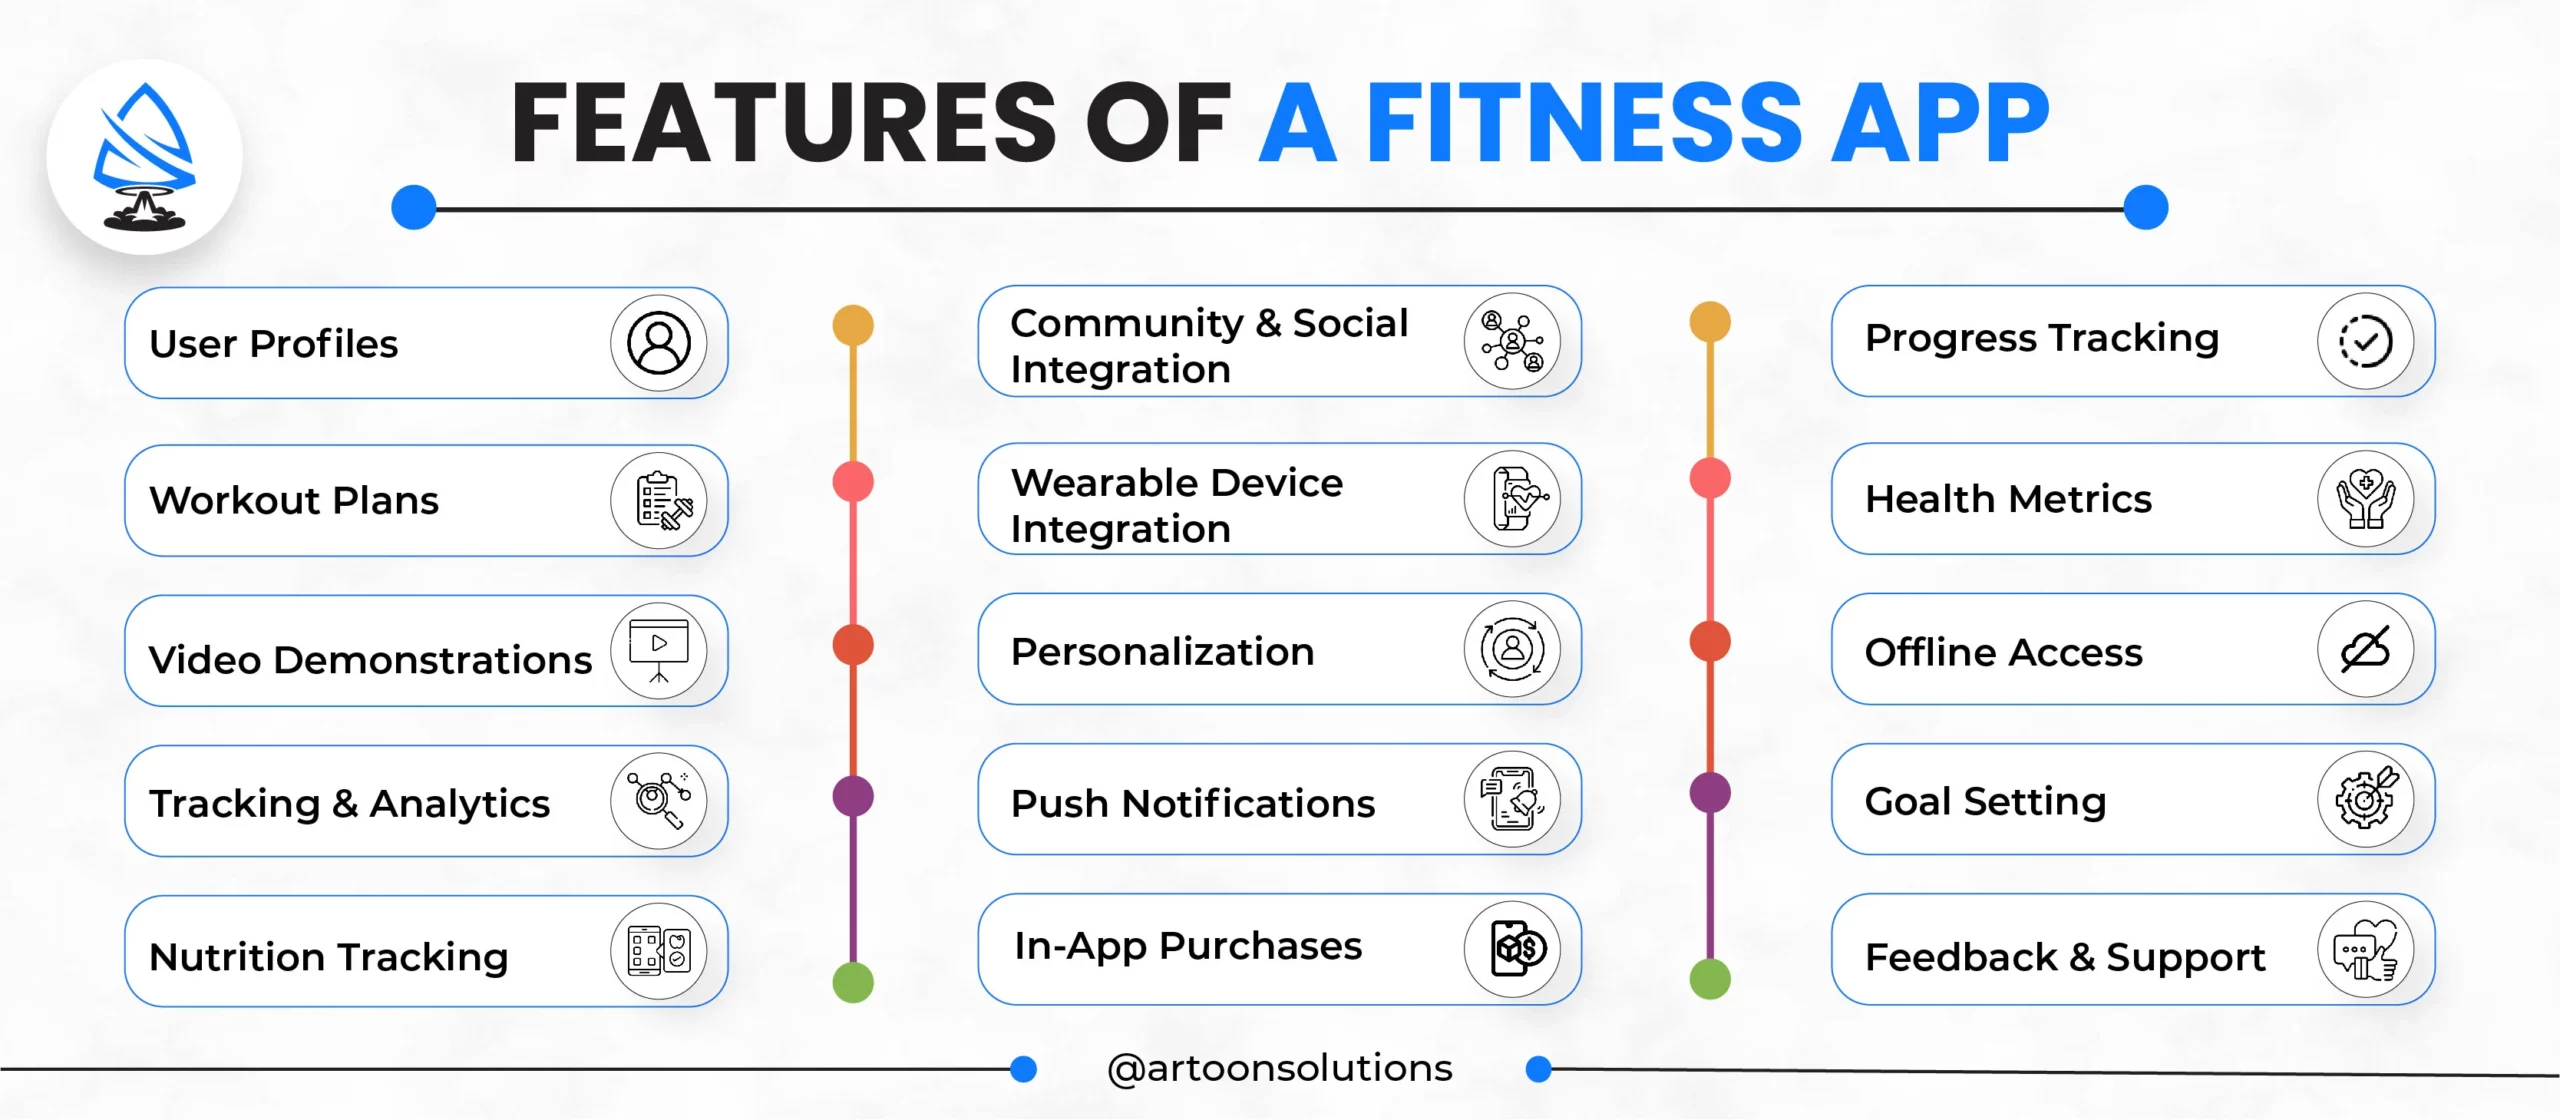 Features of a Fitness App